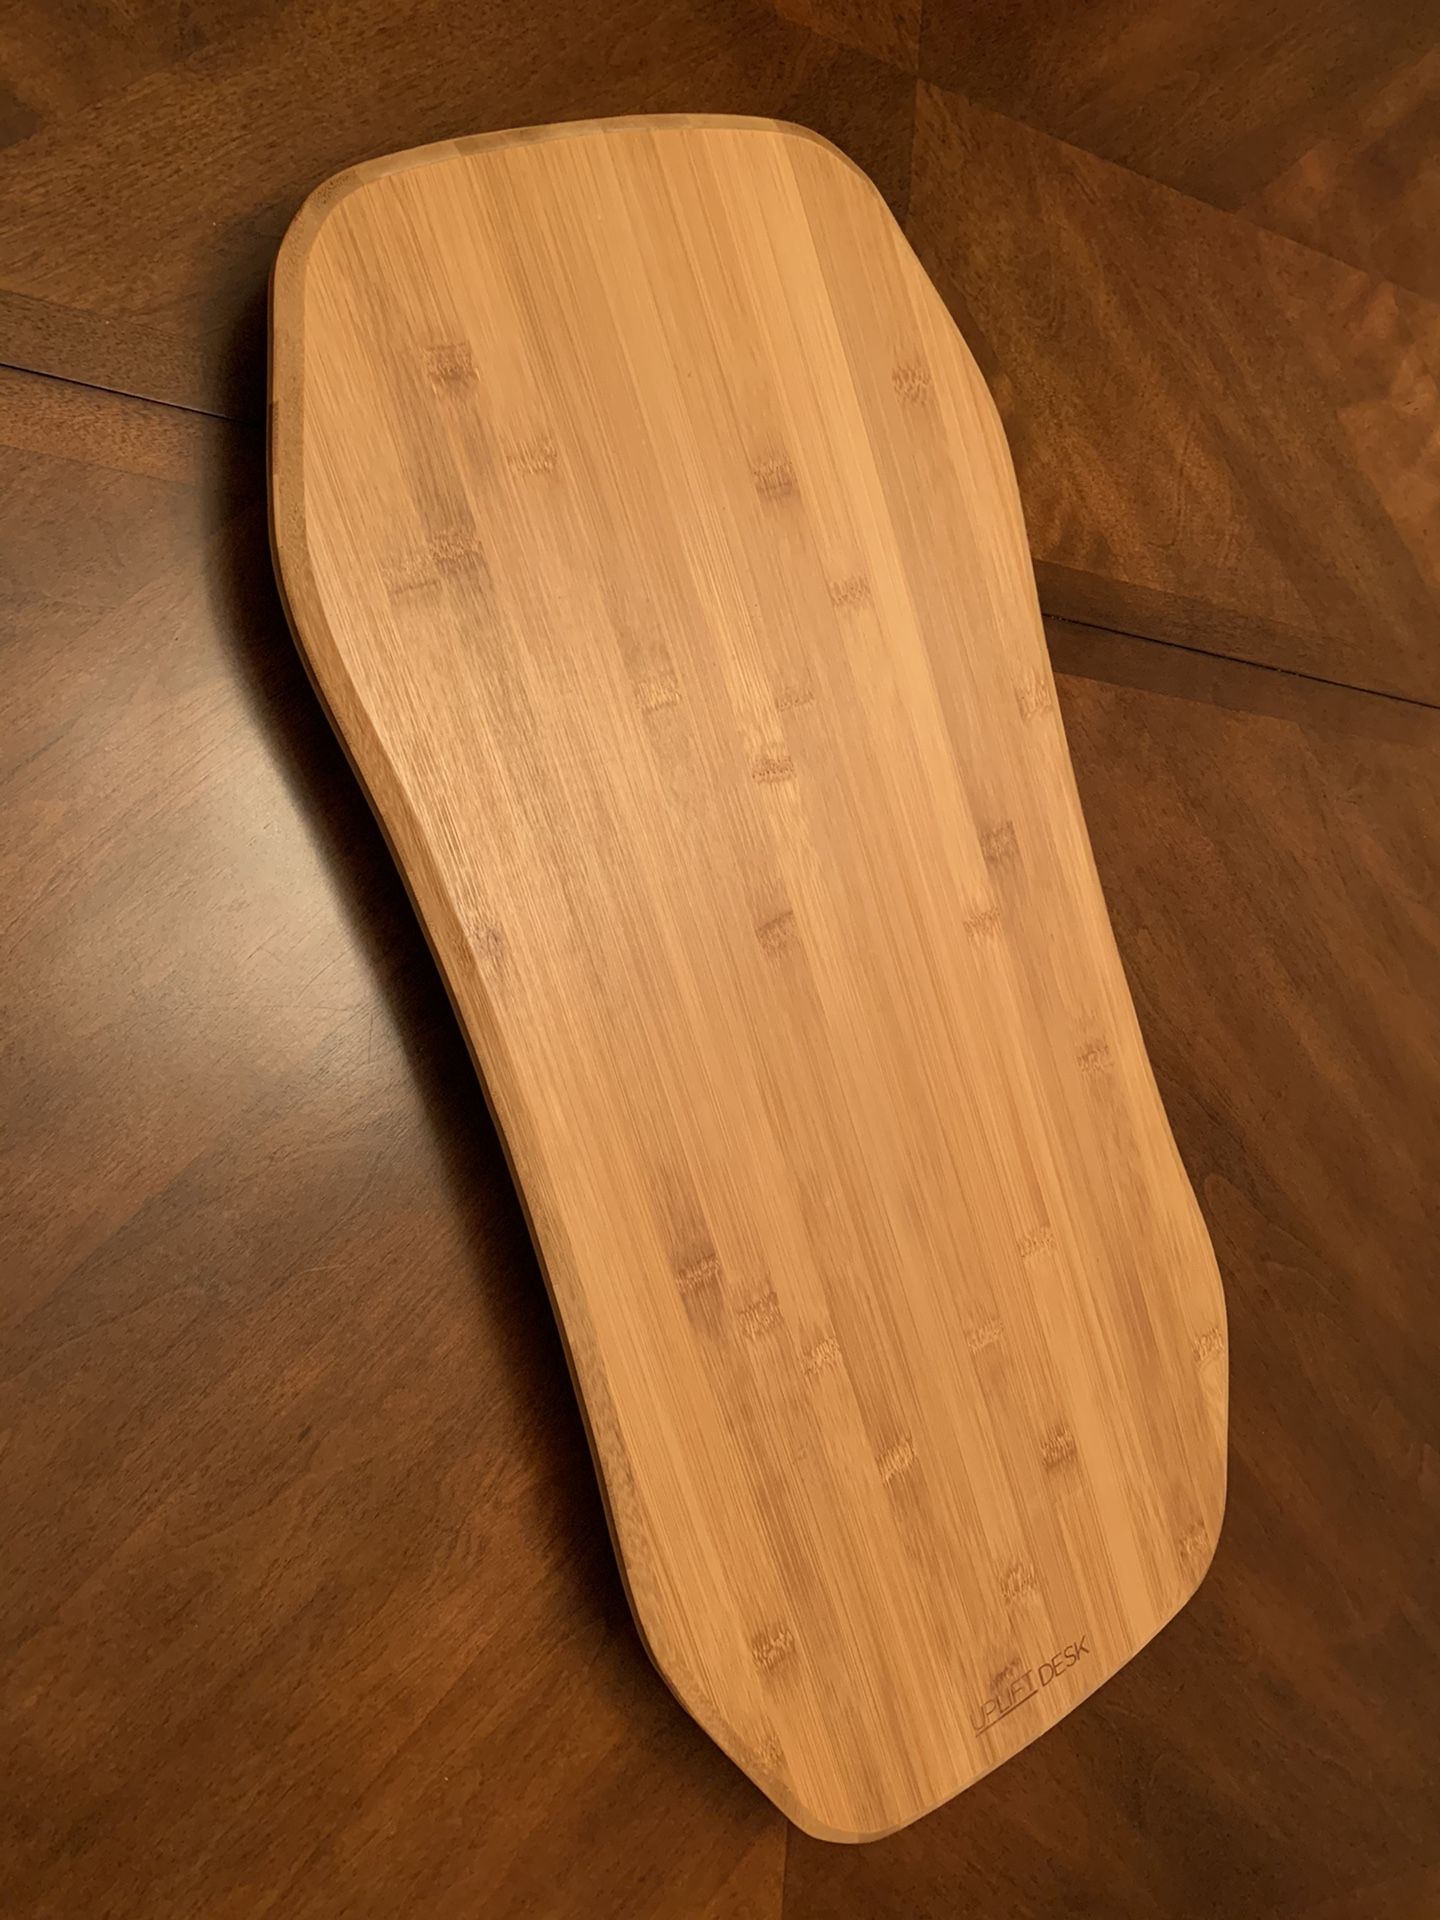 Bamboo Motion-X Board From UPLIFT Desk